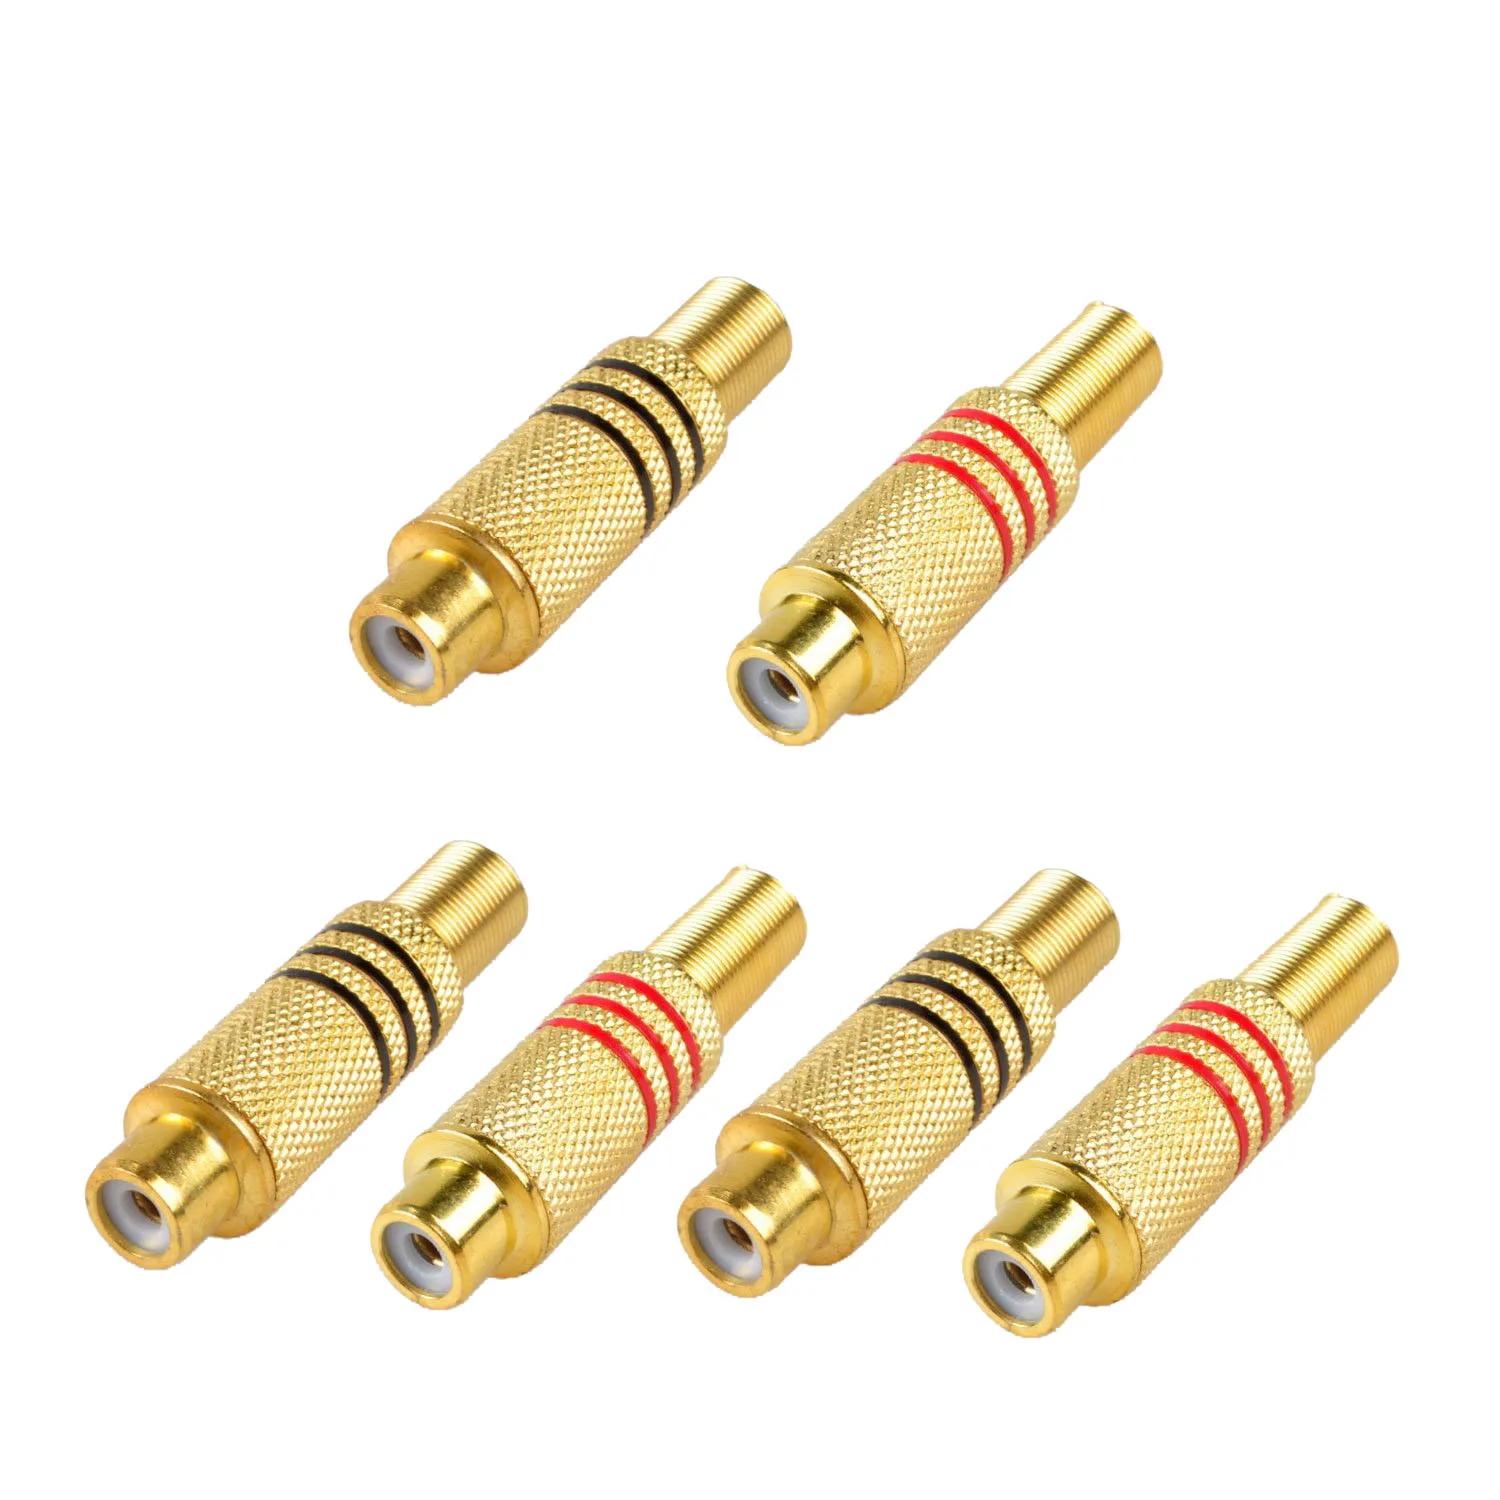 

RCA Connector Plug,6-Pack RCA Female Plug Screws Audio Video In-Line Jack Adapter Gold Plated Solder Type,gold